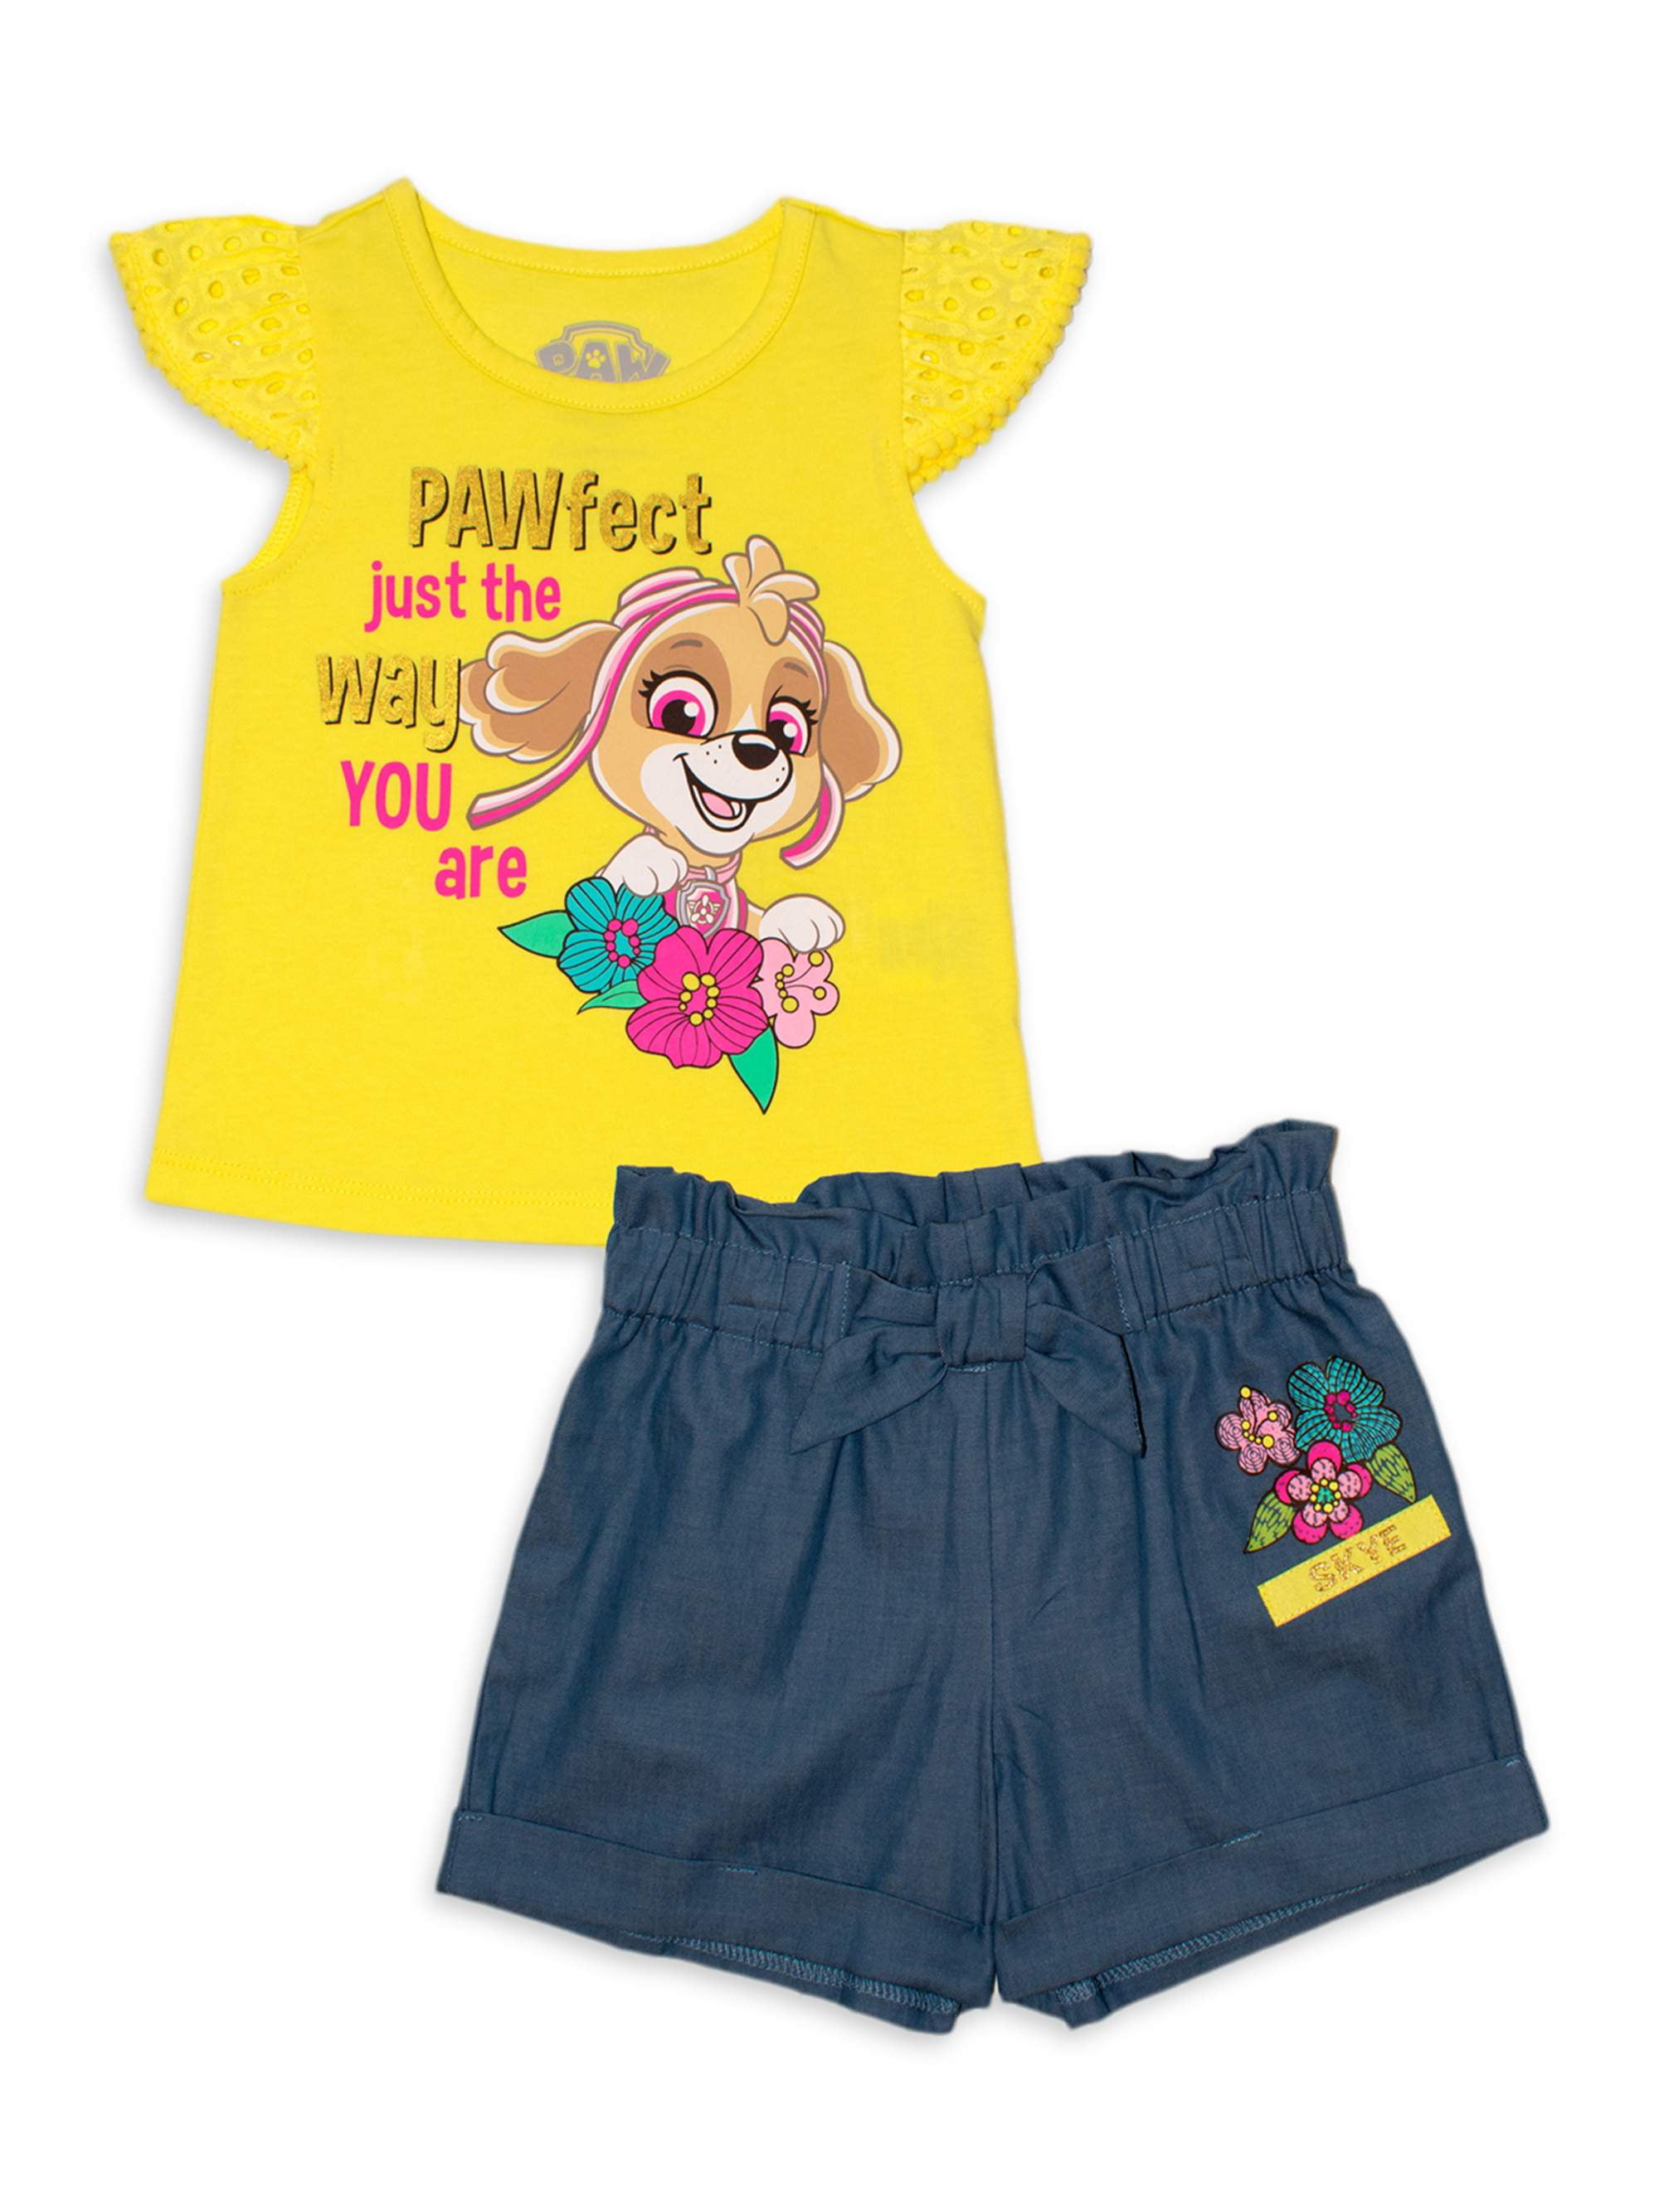 Fancy Nancy Shirt Shorts Outfit Clothes Little Girl Toddler 3PC